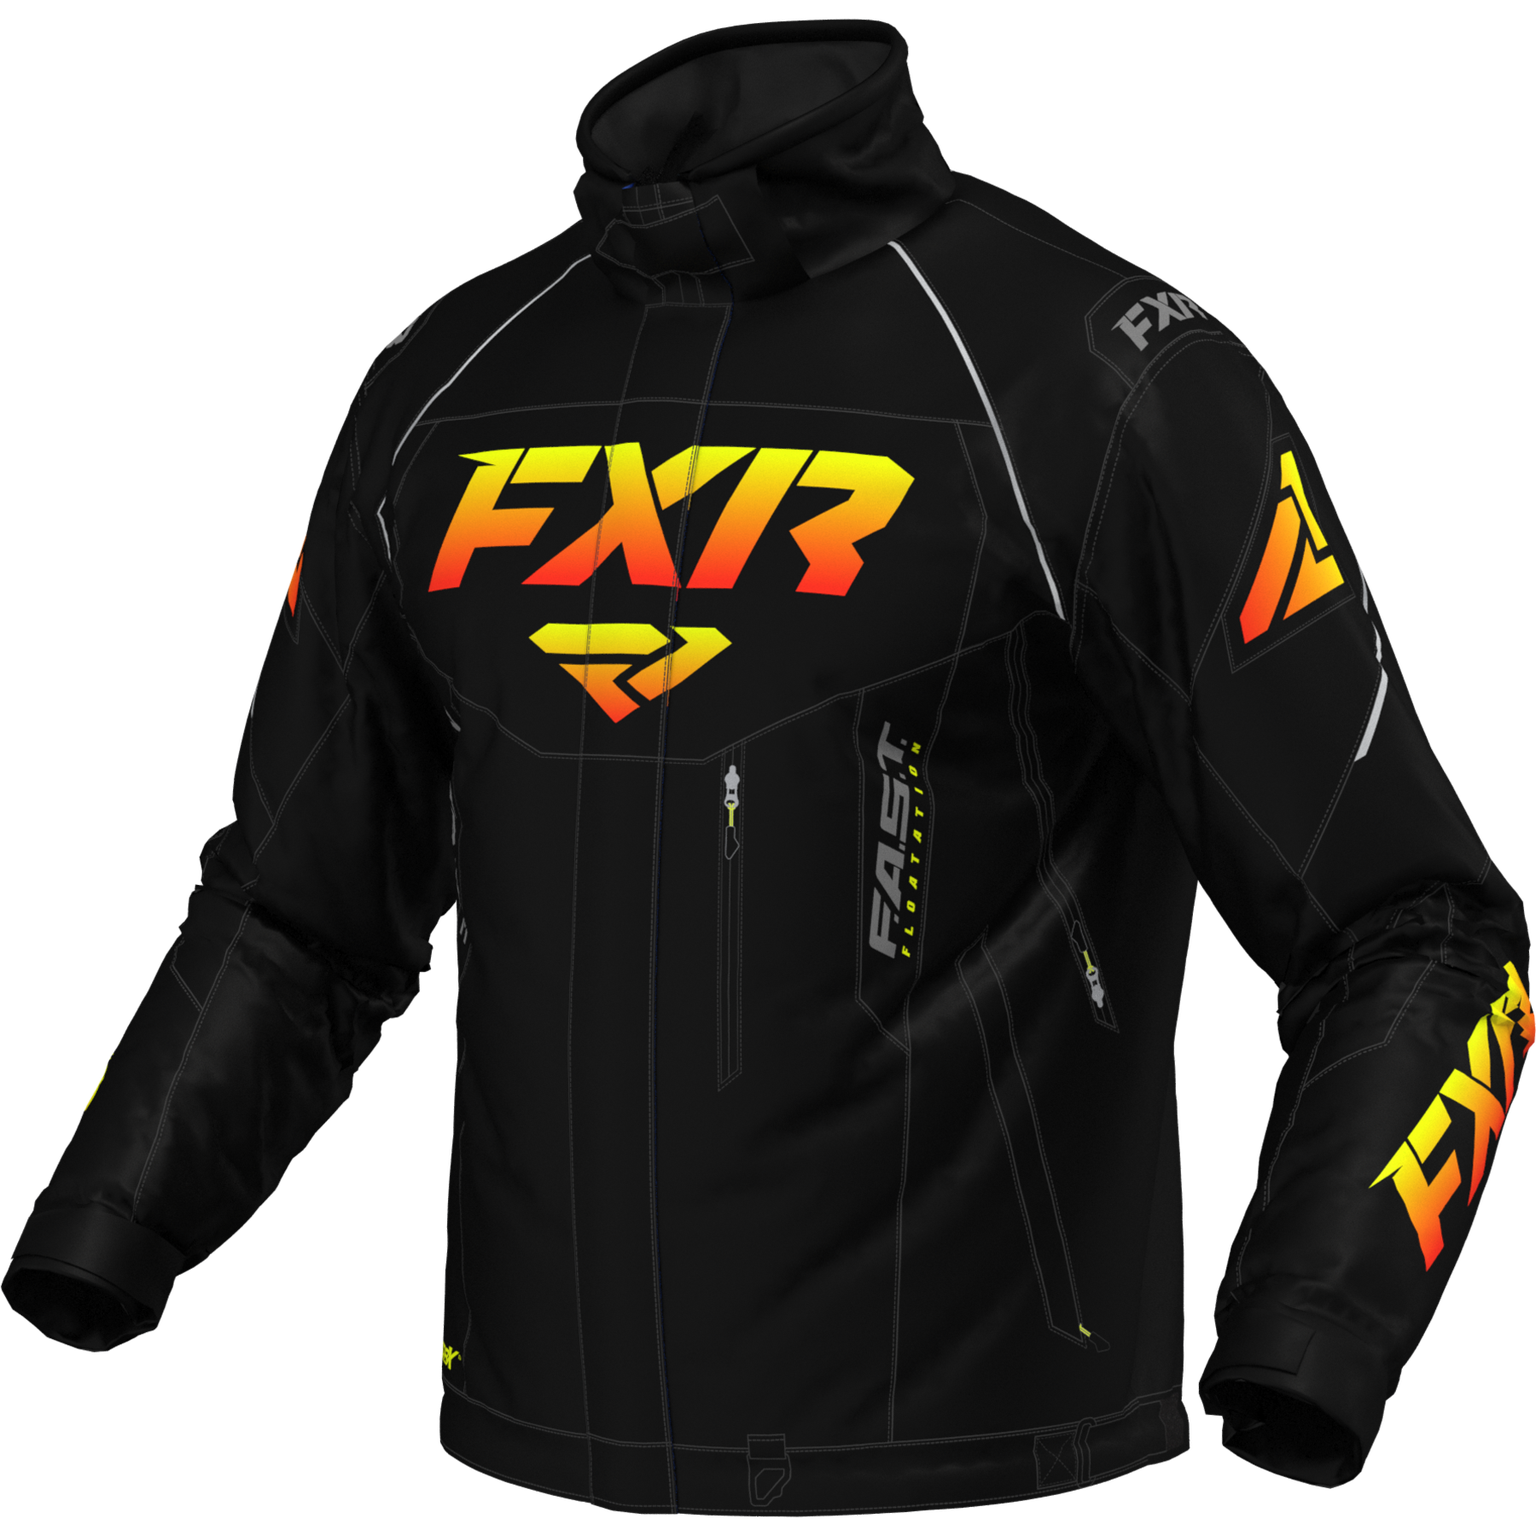 fxr racing jackets  octane f.a.s.t. insulated - snowmobile